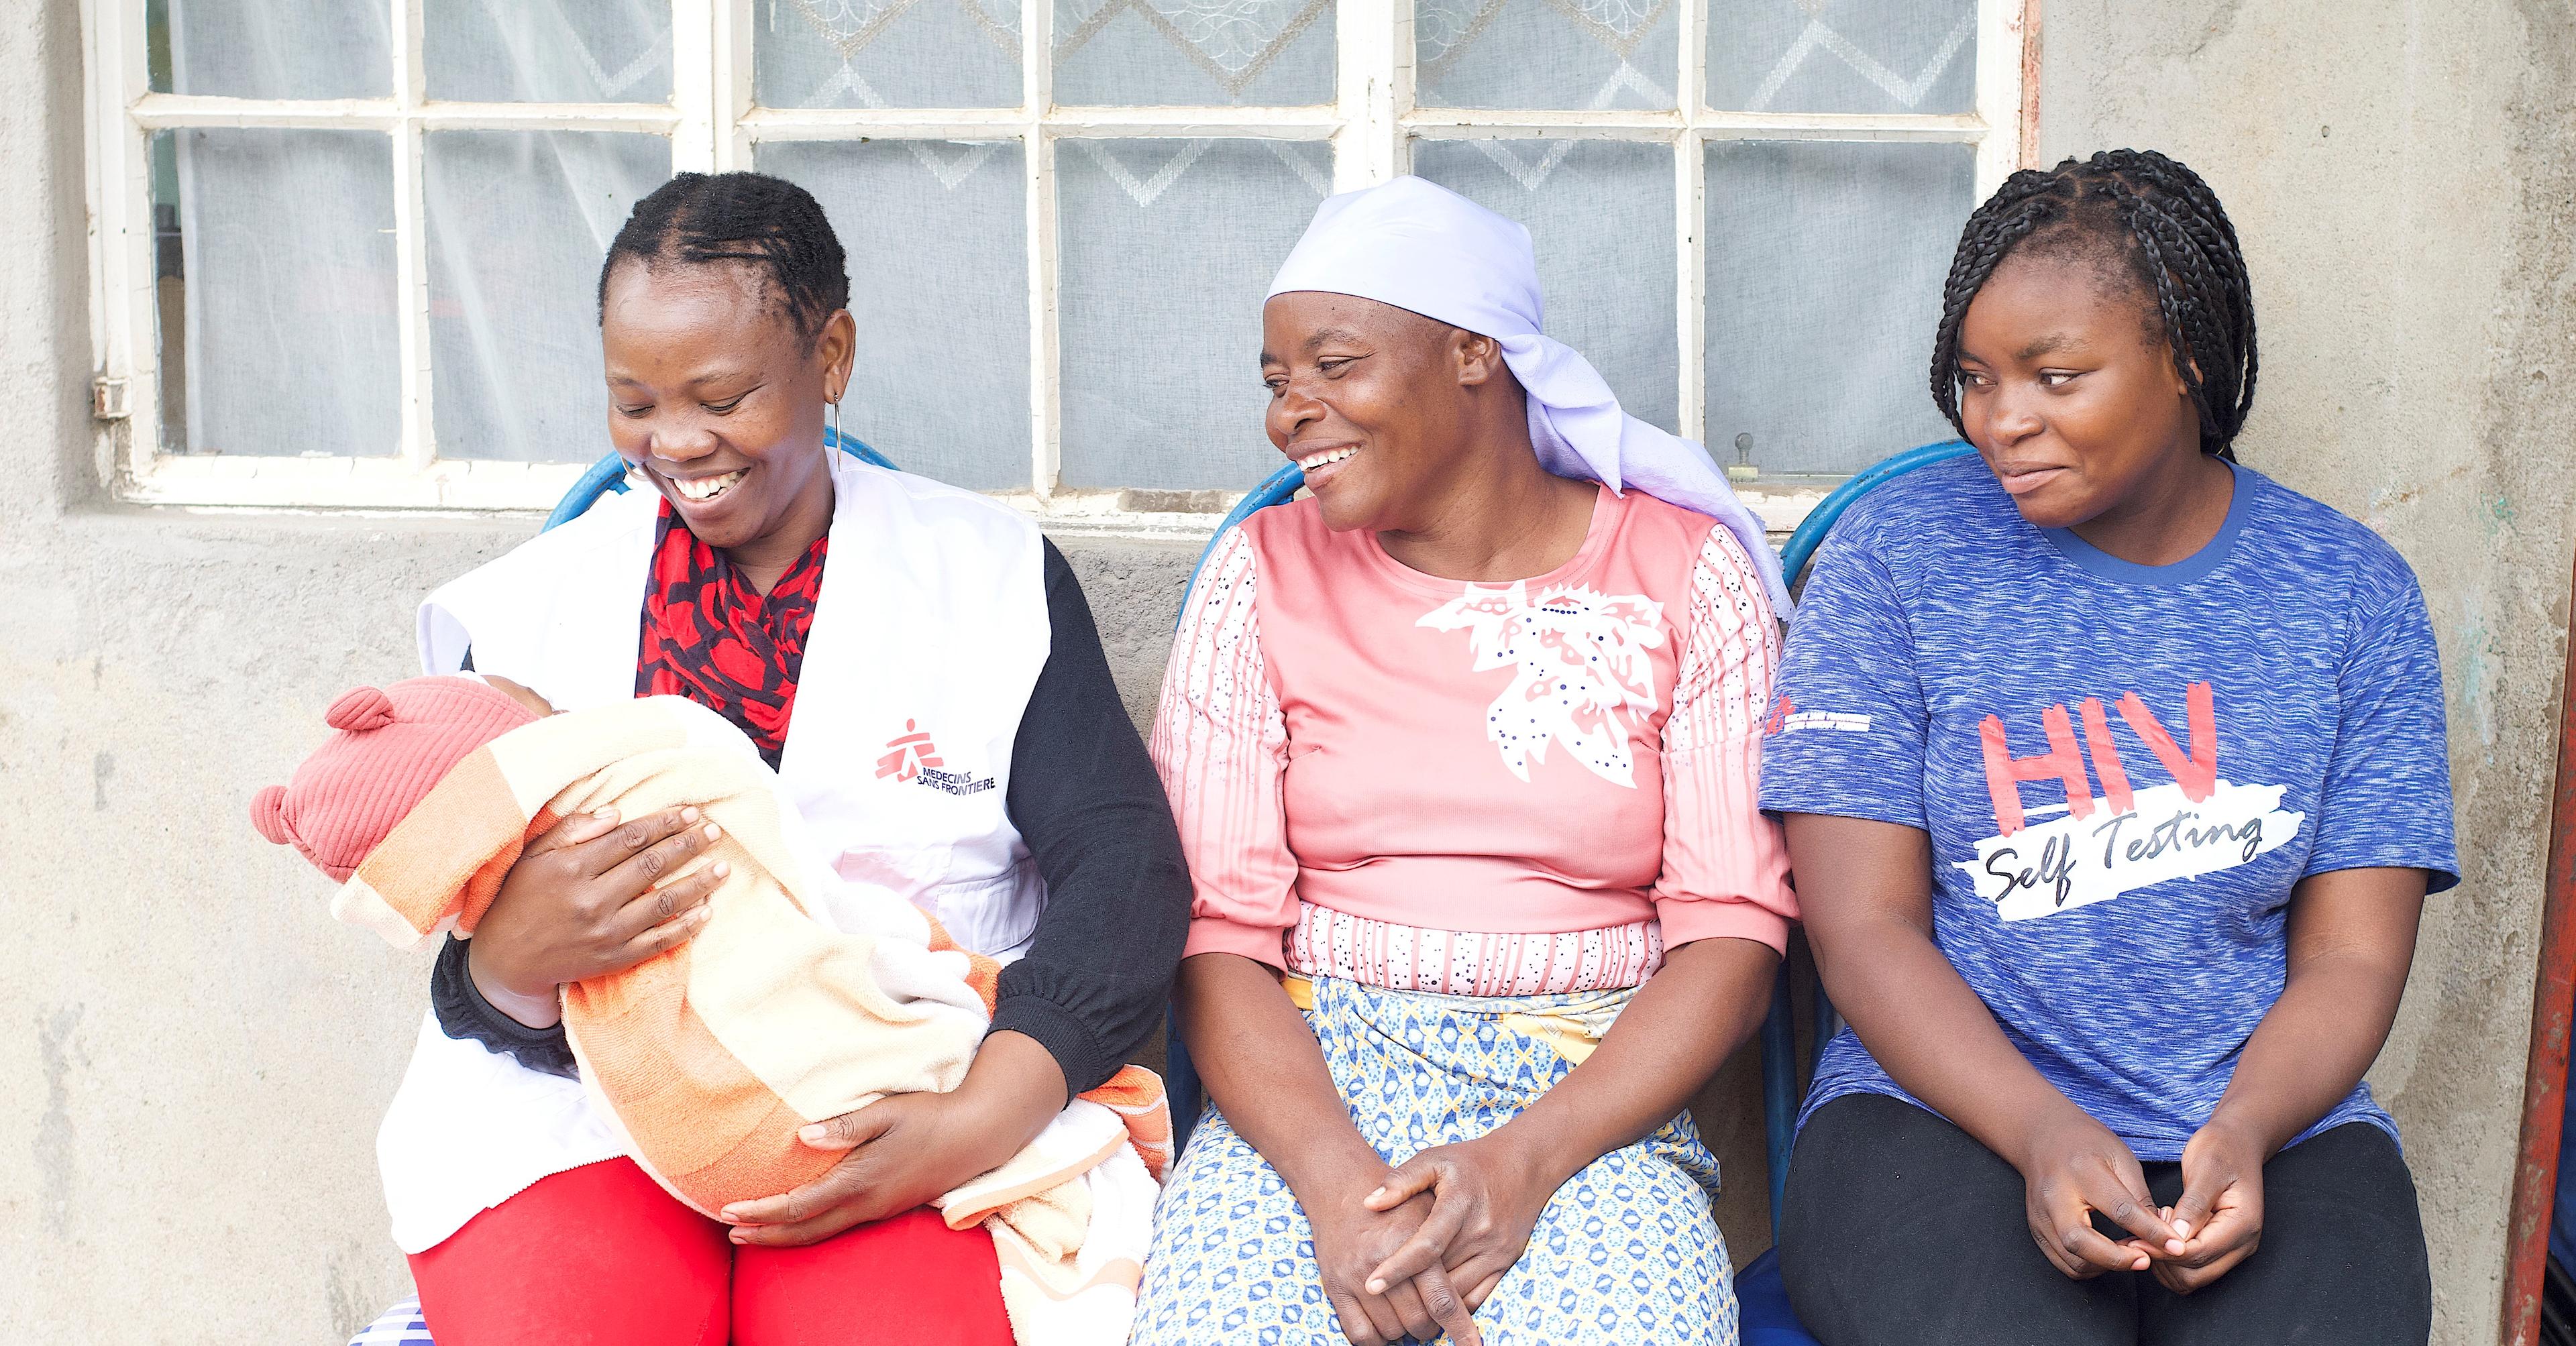 MSF social worker Relative Chitungo welcomed Marvellous, right, on the first day she entered the MSF Edith clinic seeking support for her pregnancy in Mbare 